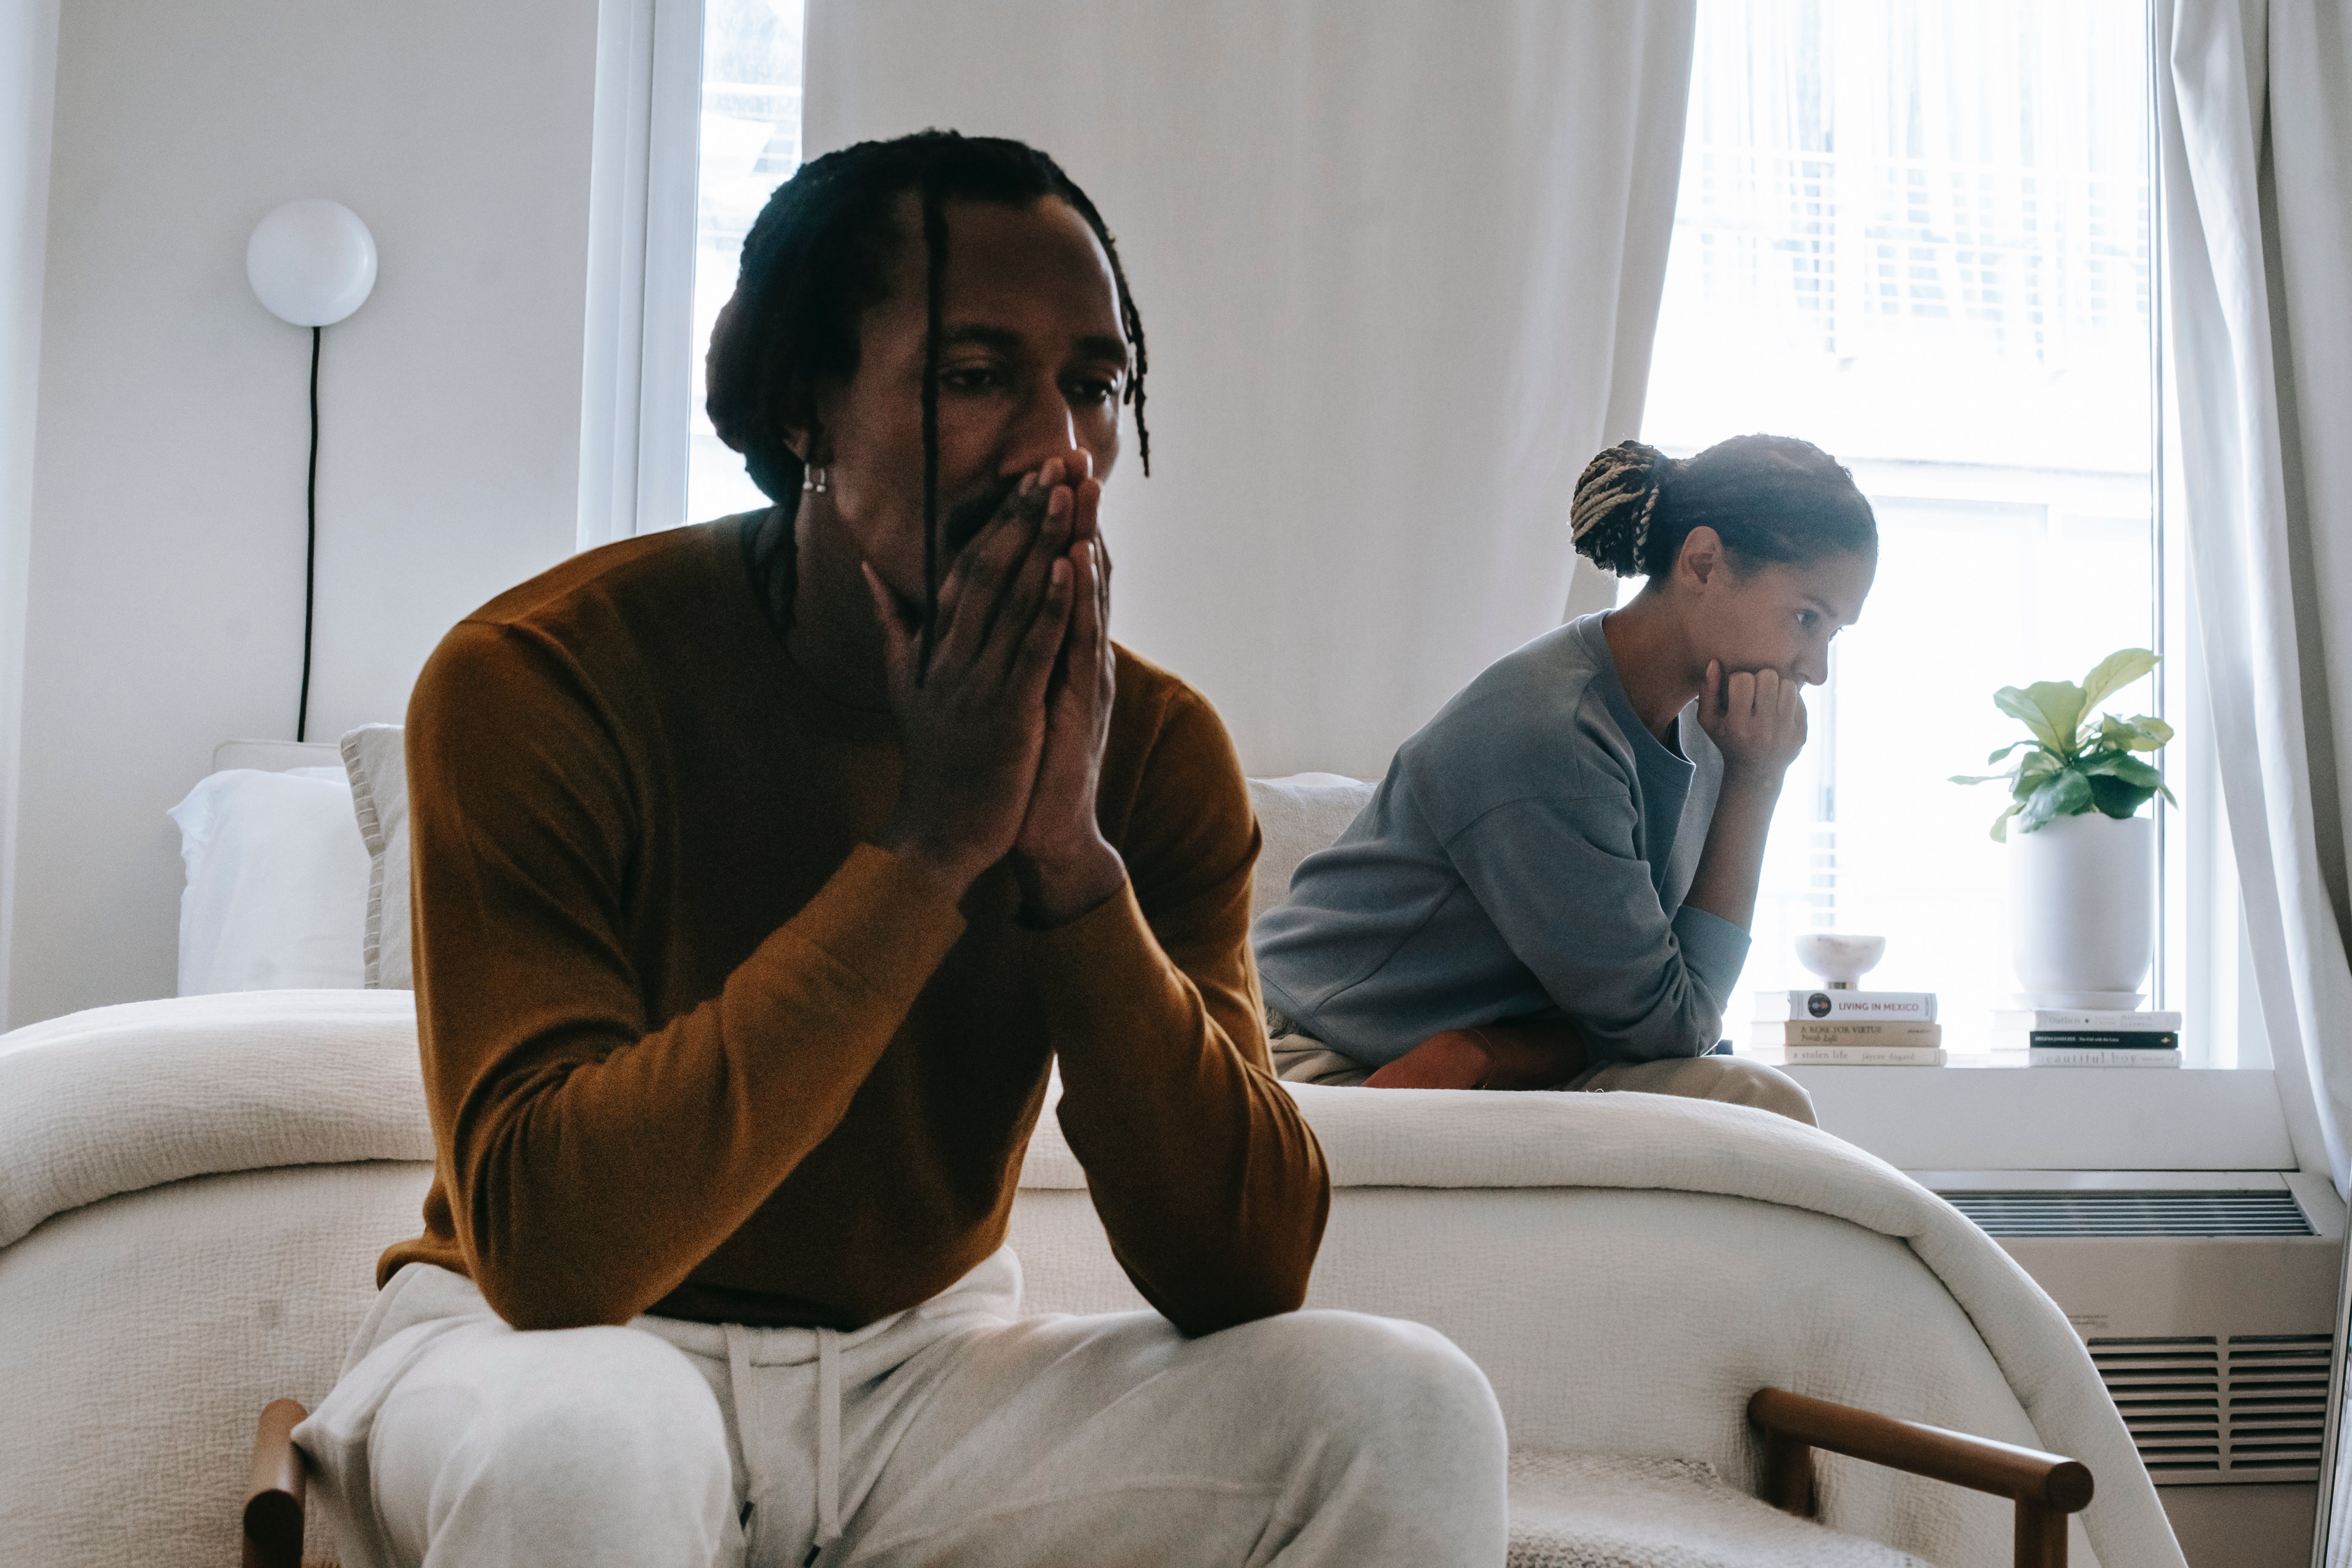 A couple sitting apart on a bed as they contemplate something | Source: Pexels